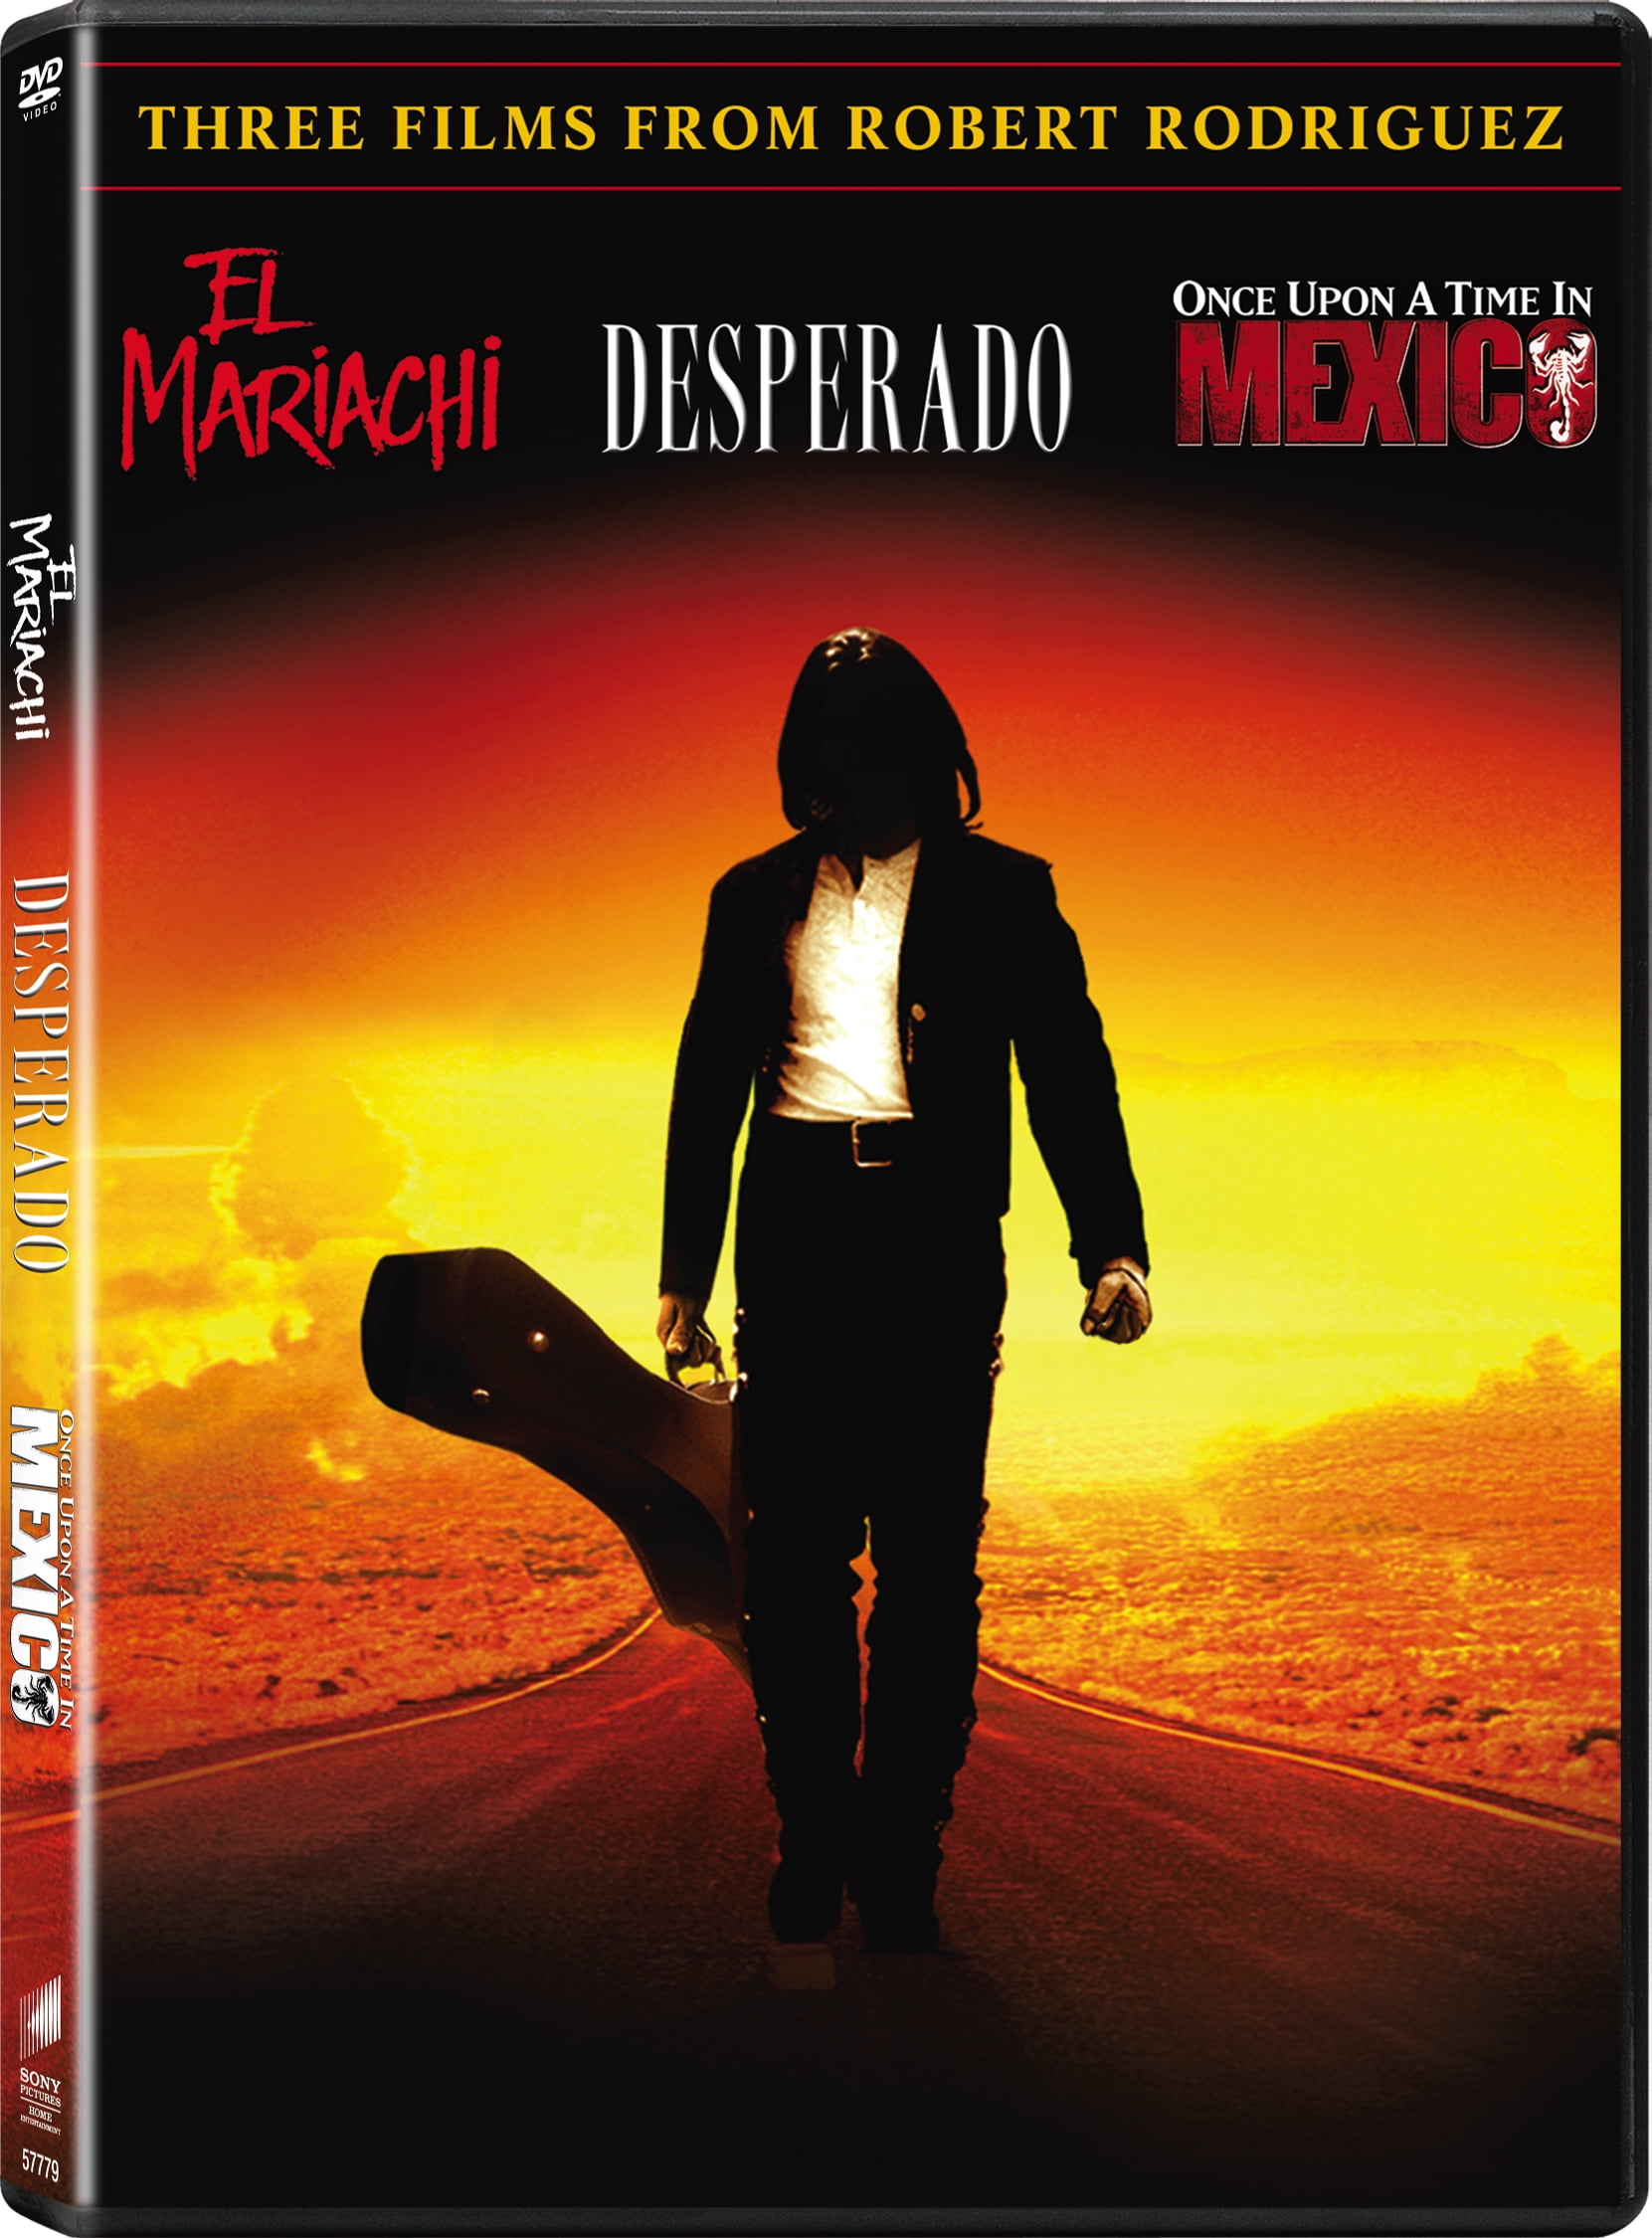 Desperado/Once Upon a Time in Mexico (Ultimate Action Pack) on DVD Movie